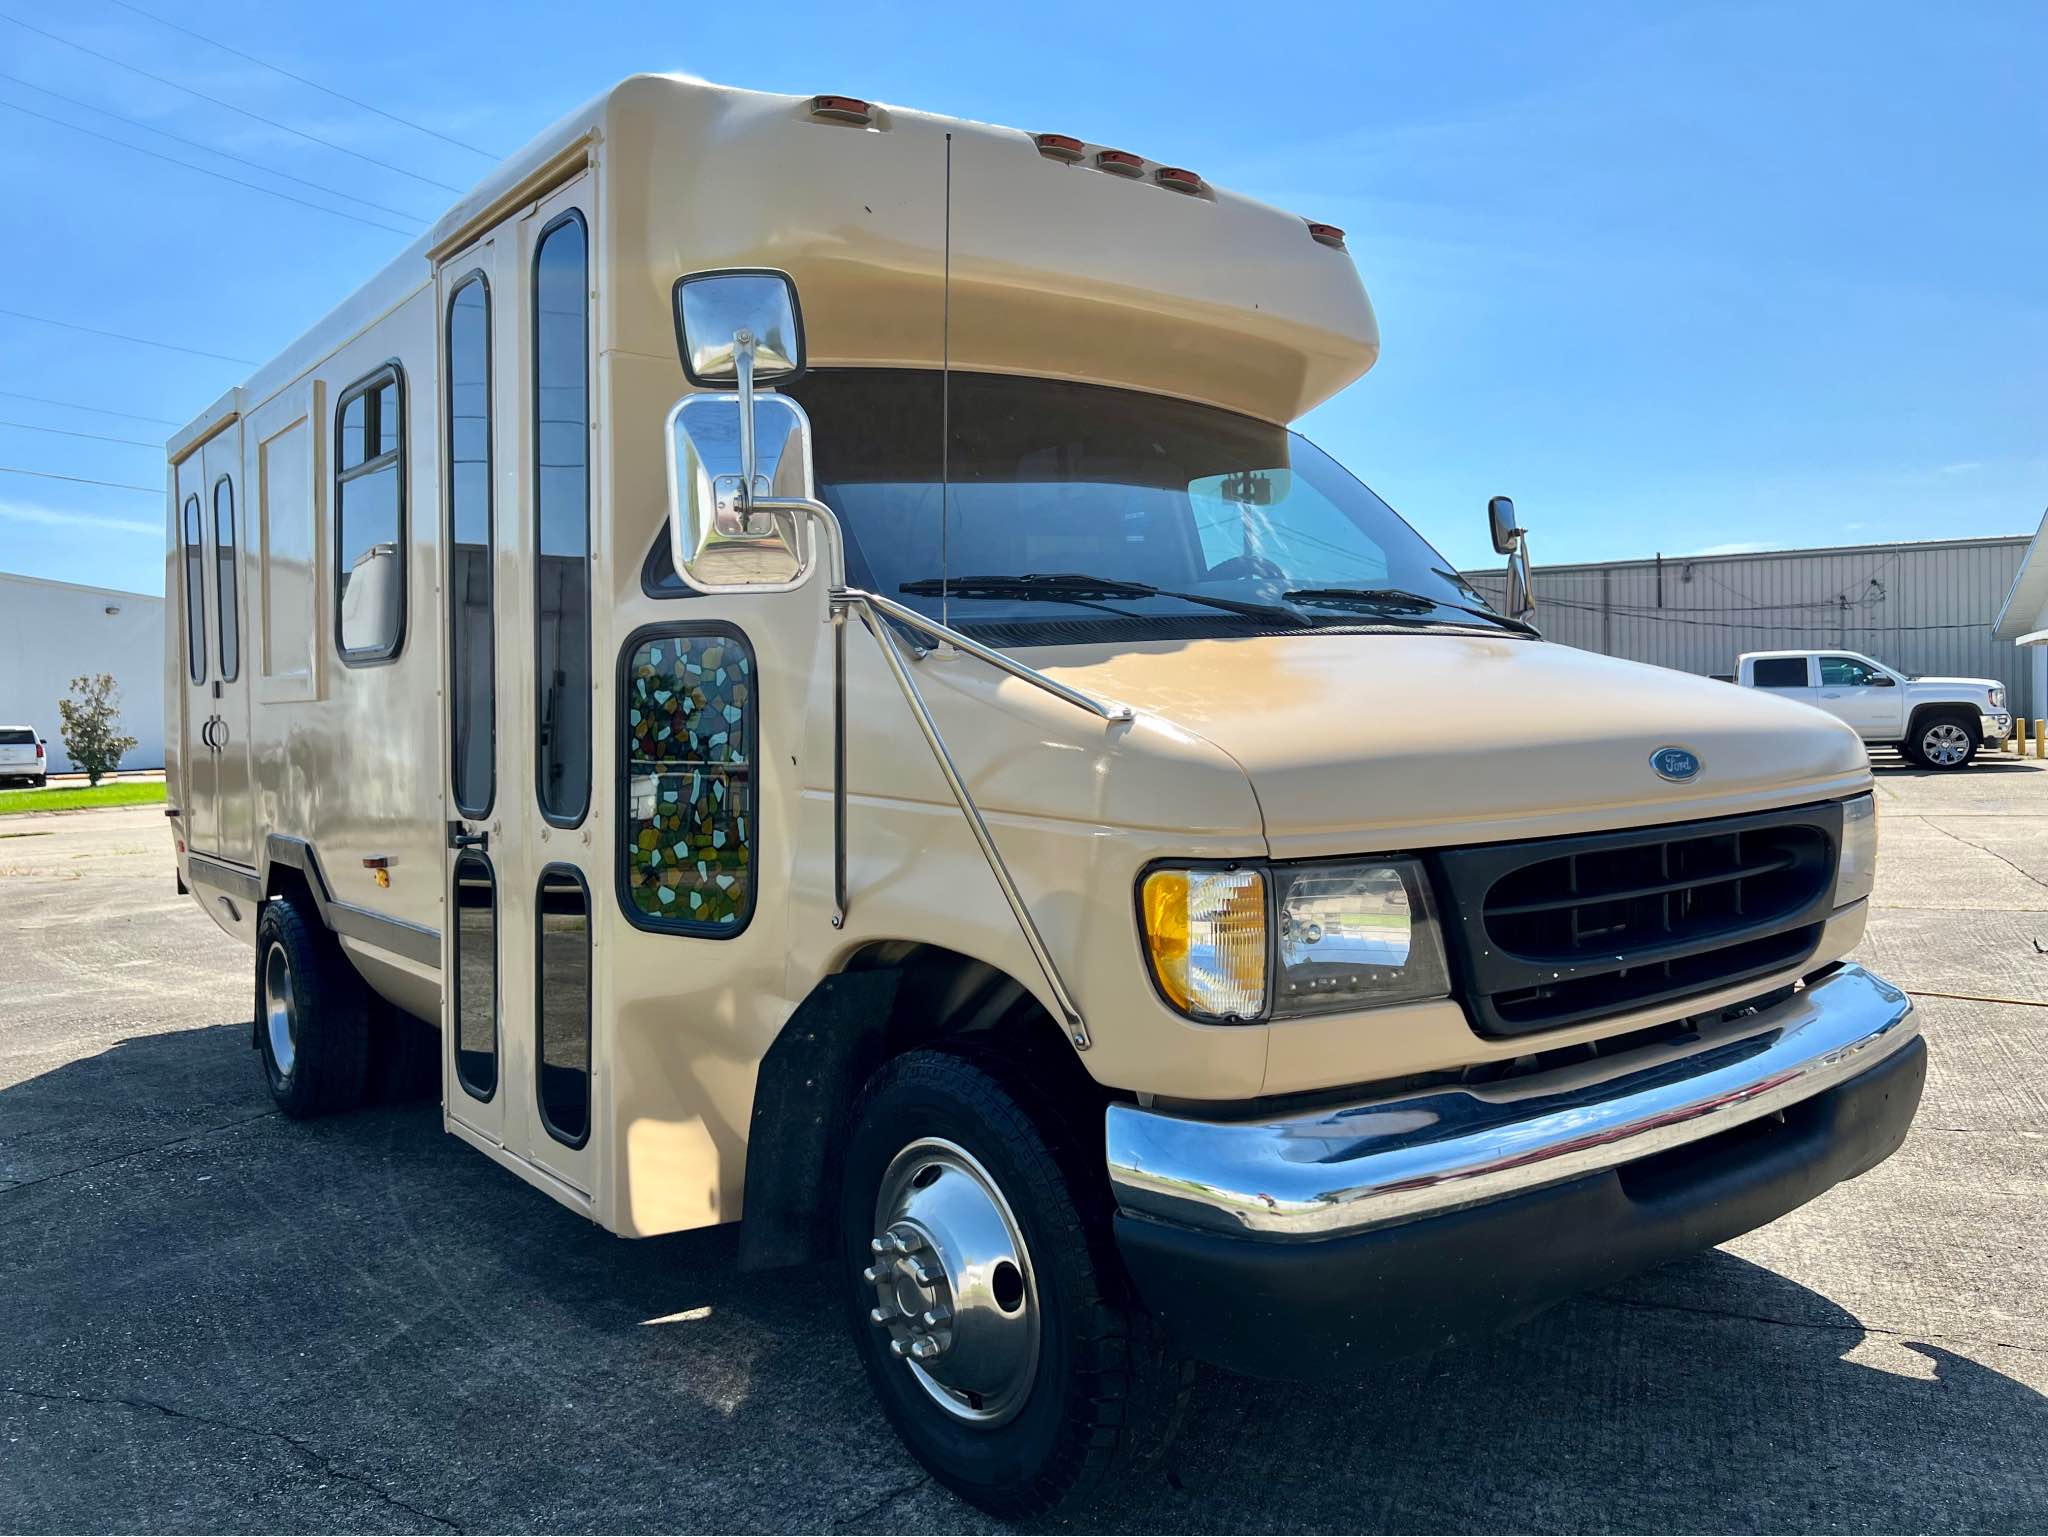 This Ford E-350-Based Motorhome Features Custom-Made Rustic Interior -  autoevolution